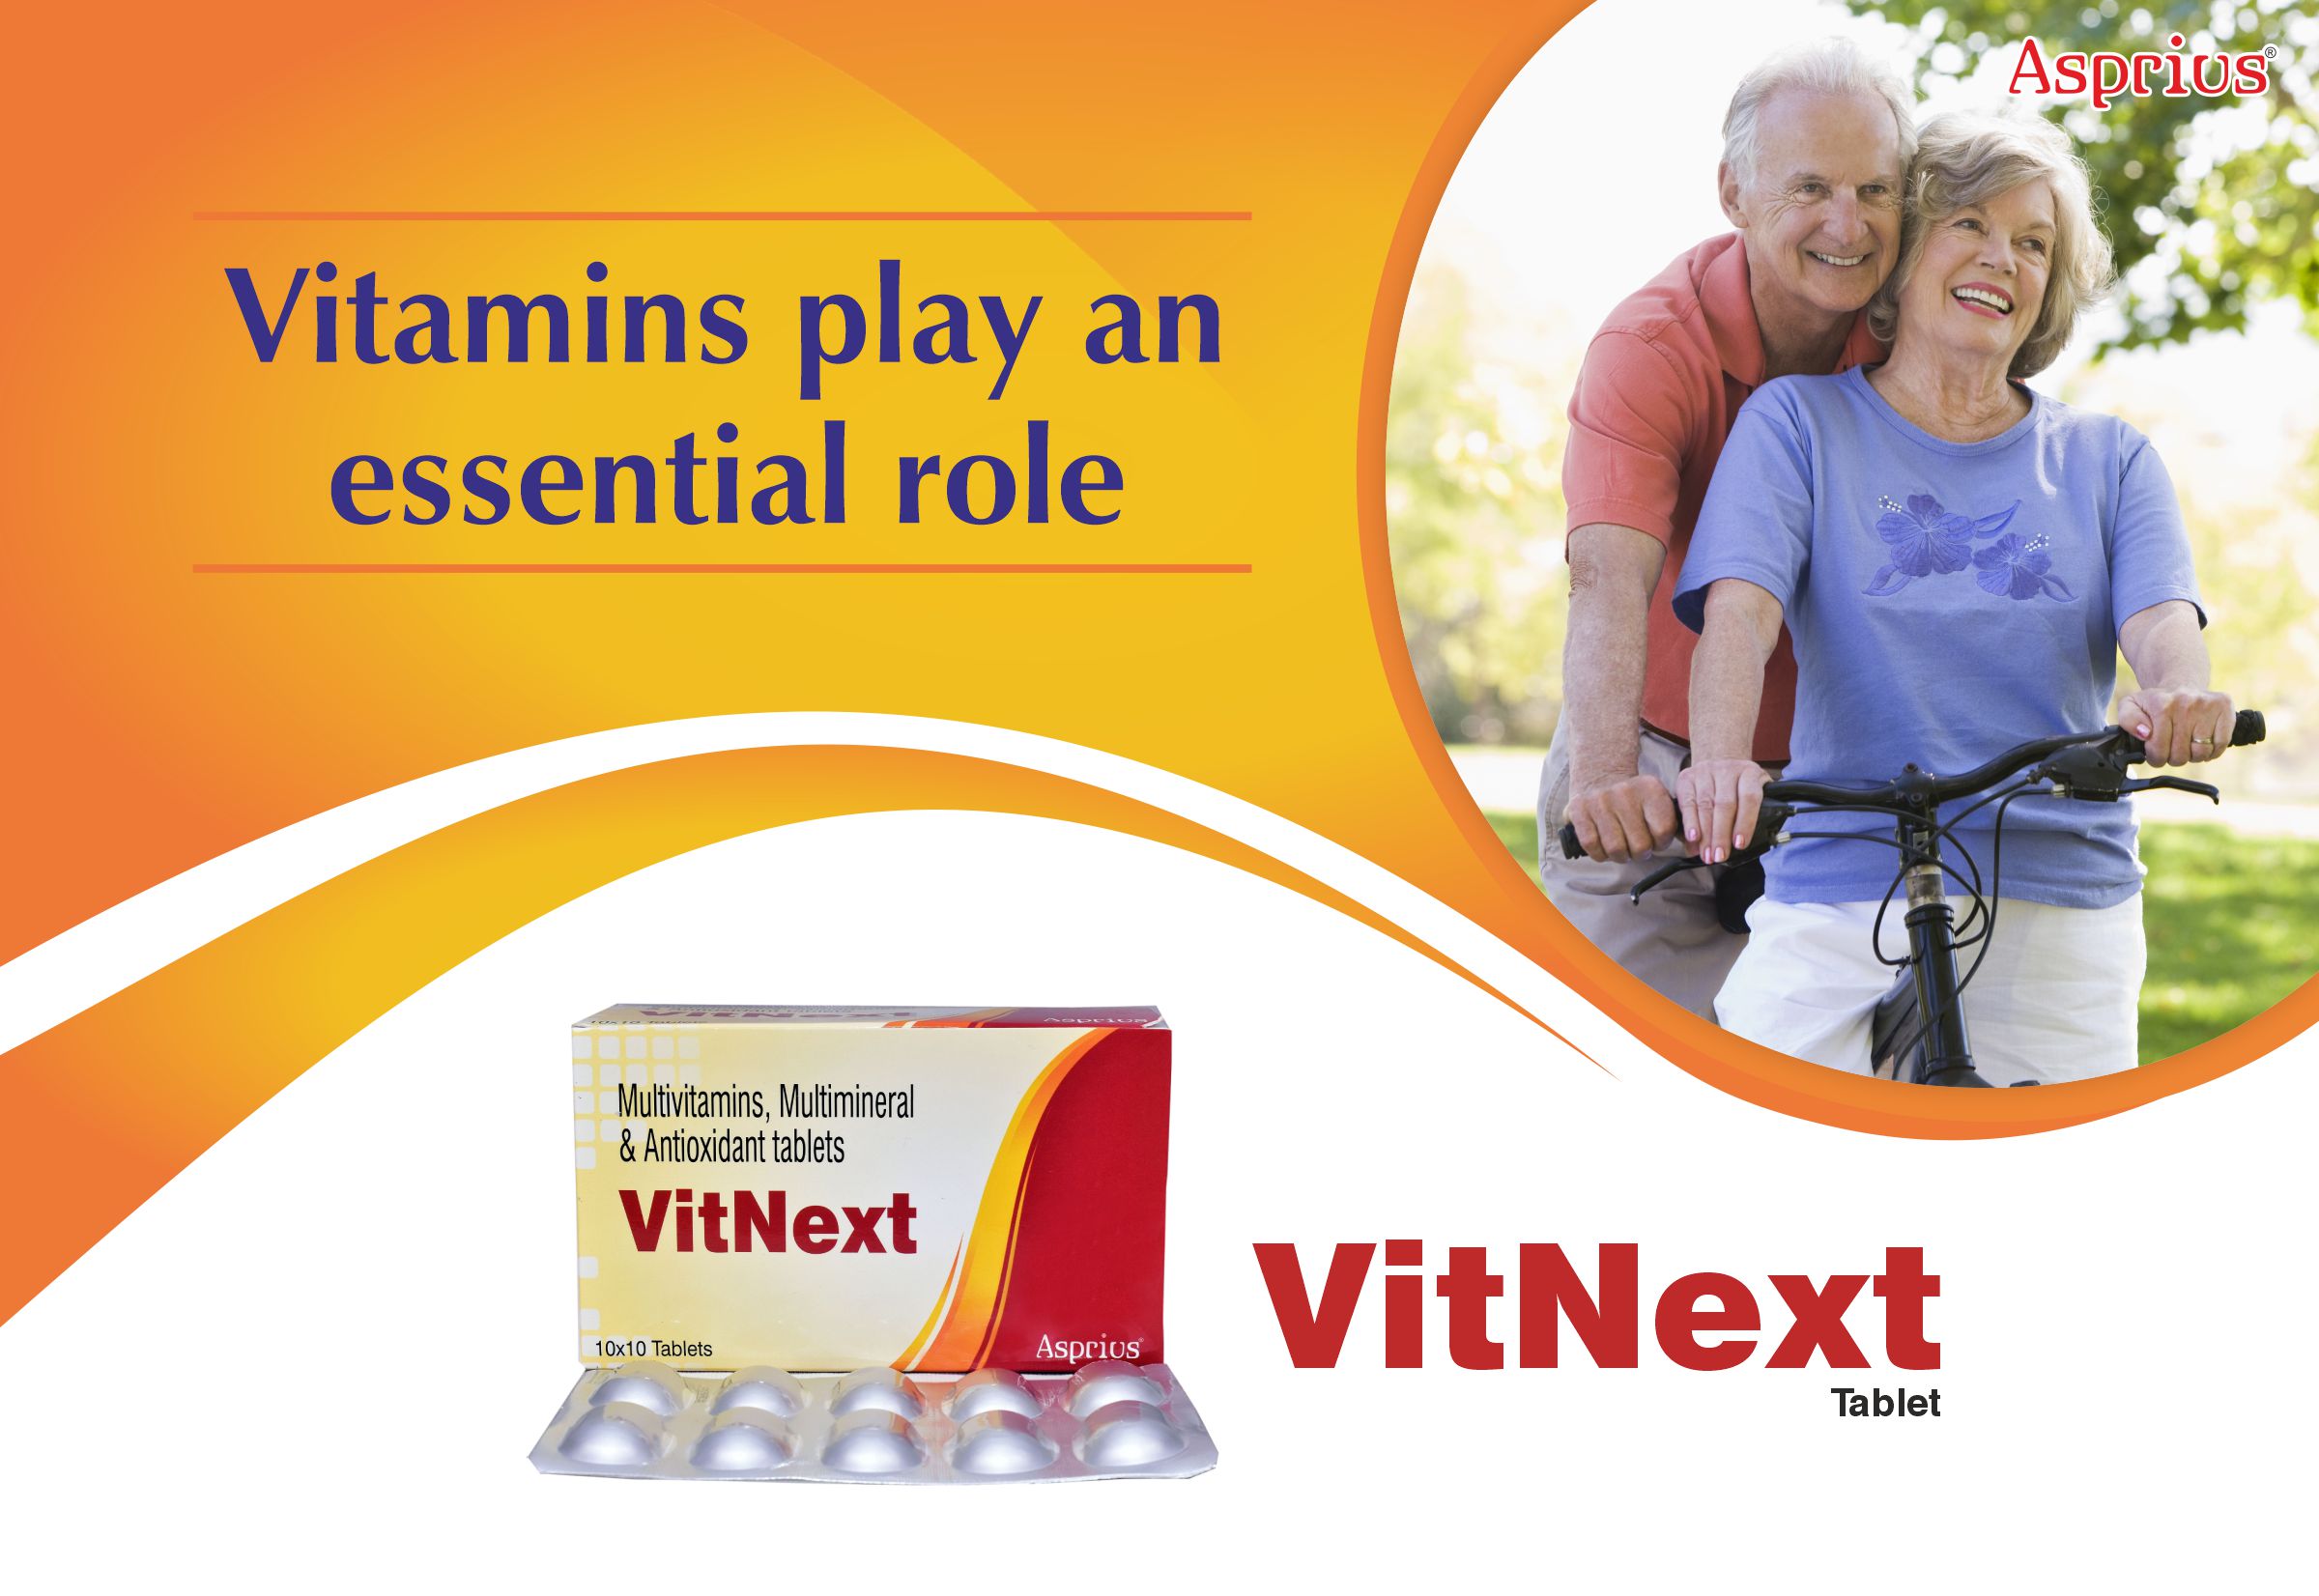 Vitamins play an essential role